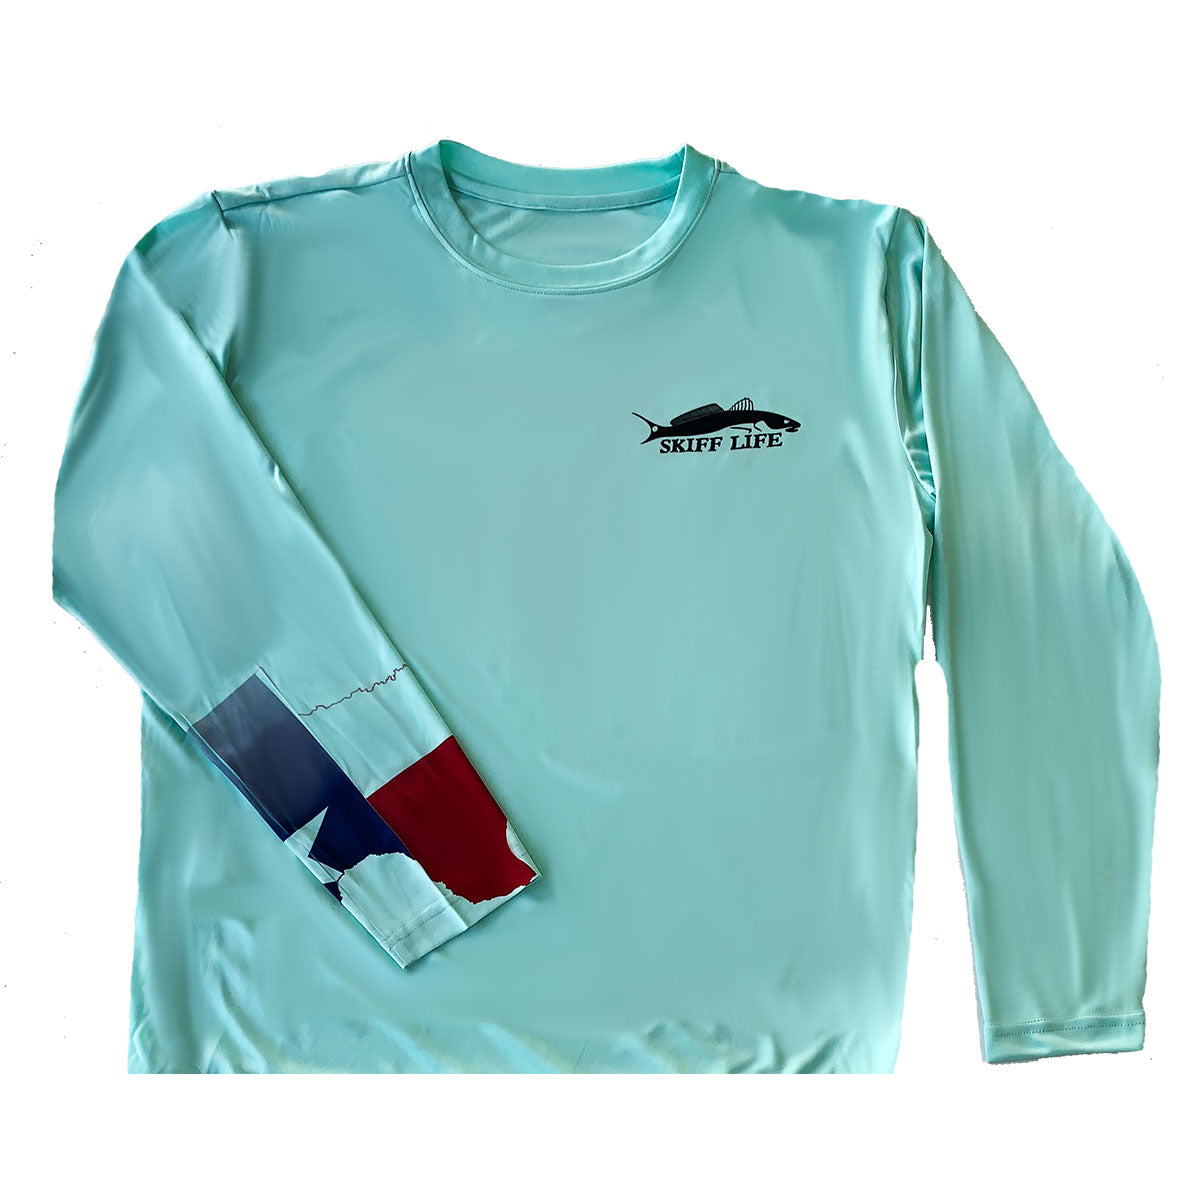 Texas Redfish & Trout Fishing Shirt with Texas State Flag Sleeve Pearl Gray / Large